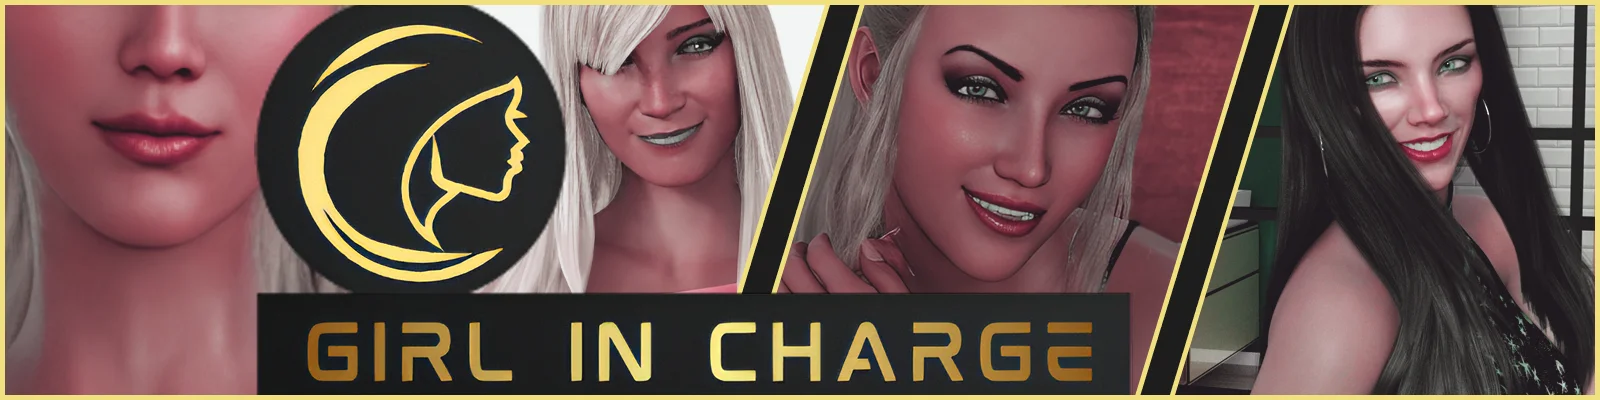 Girl in Charge v.0.32.2b